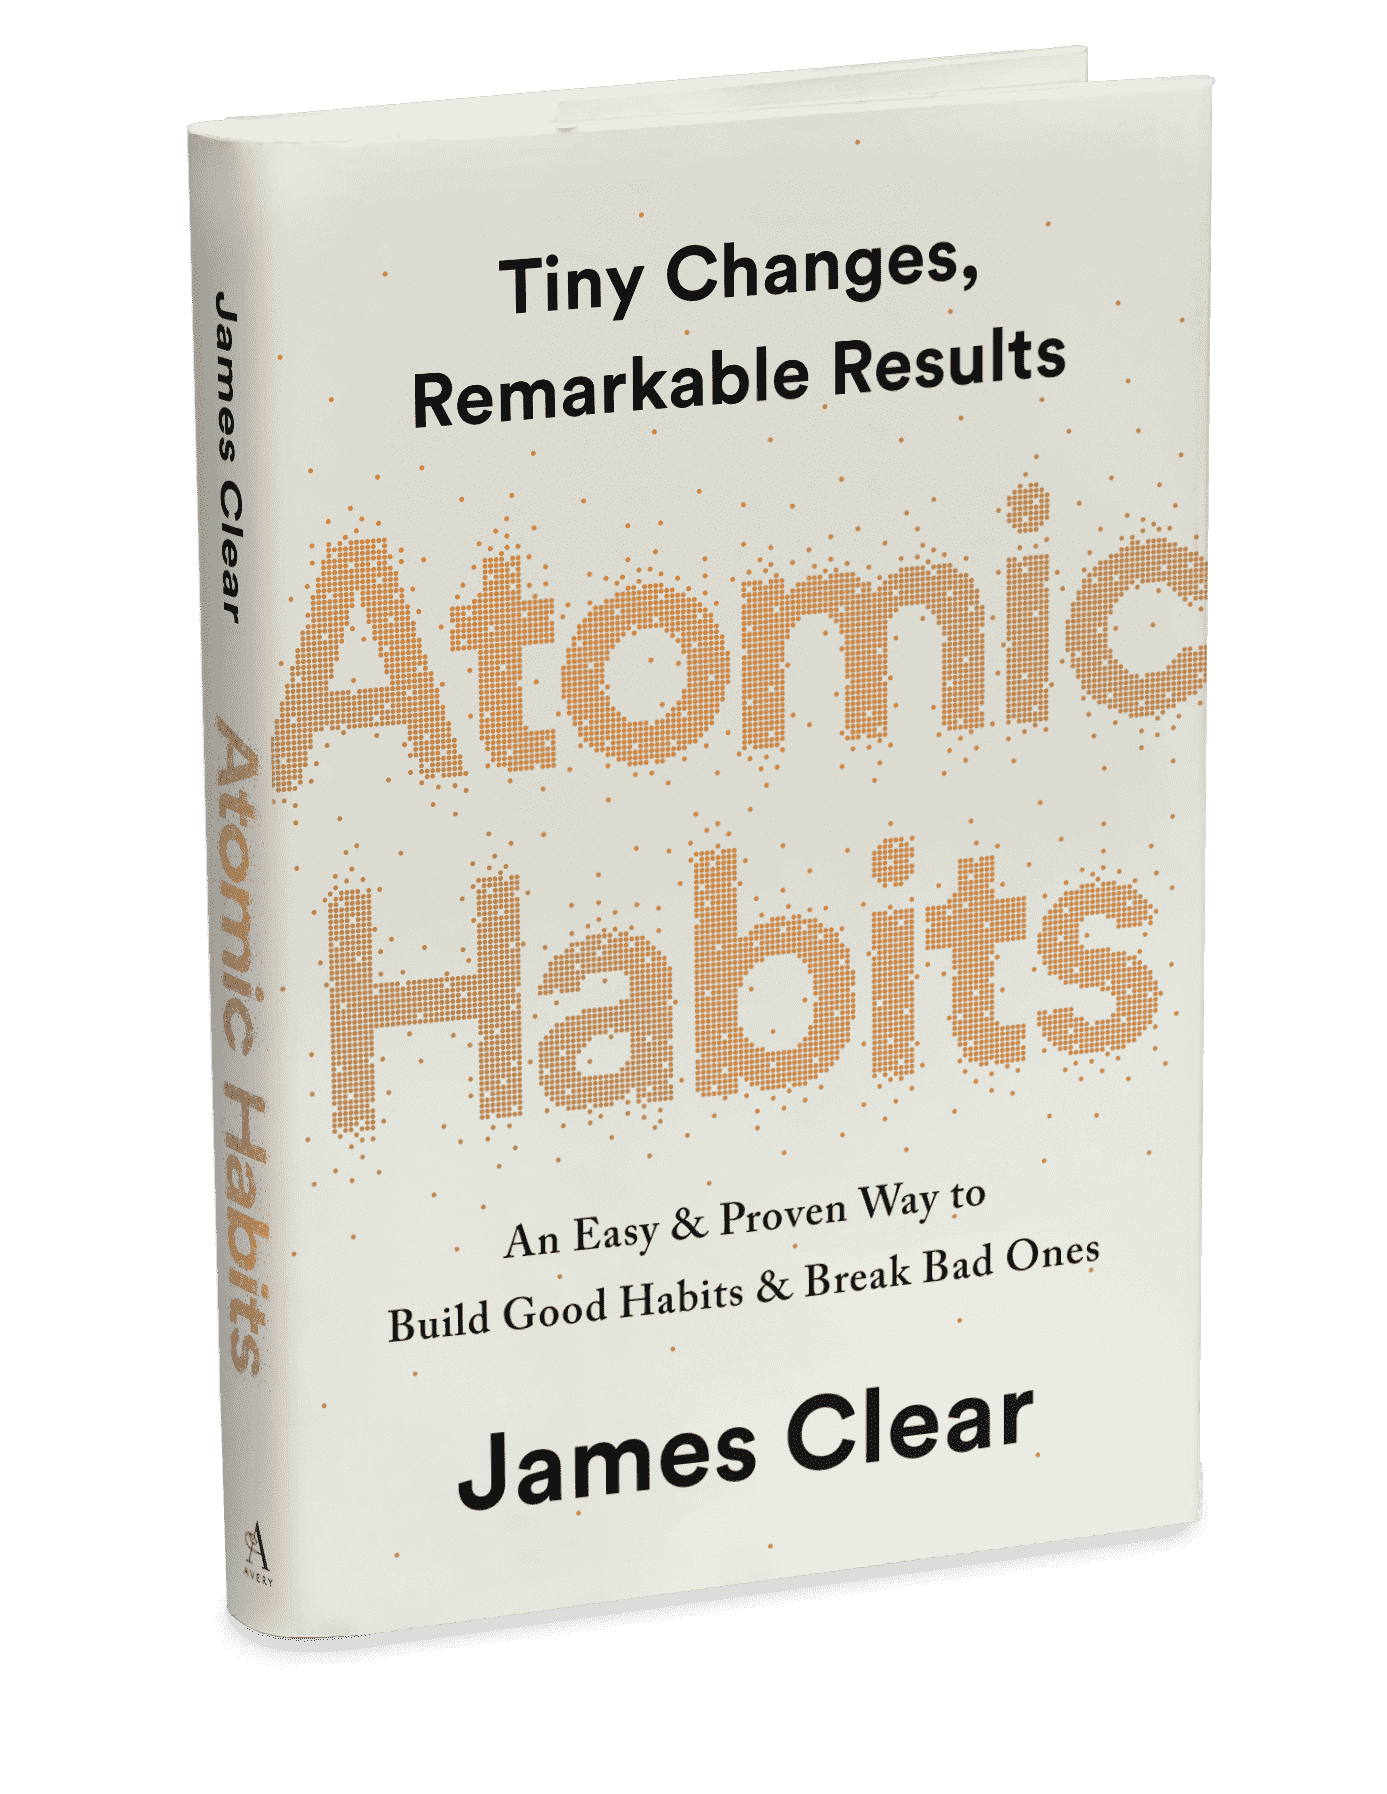 Learnings from the book Atomic habits by James Clear